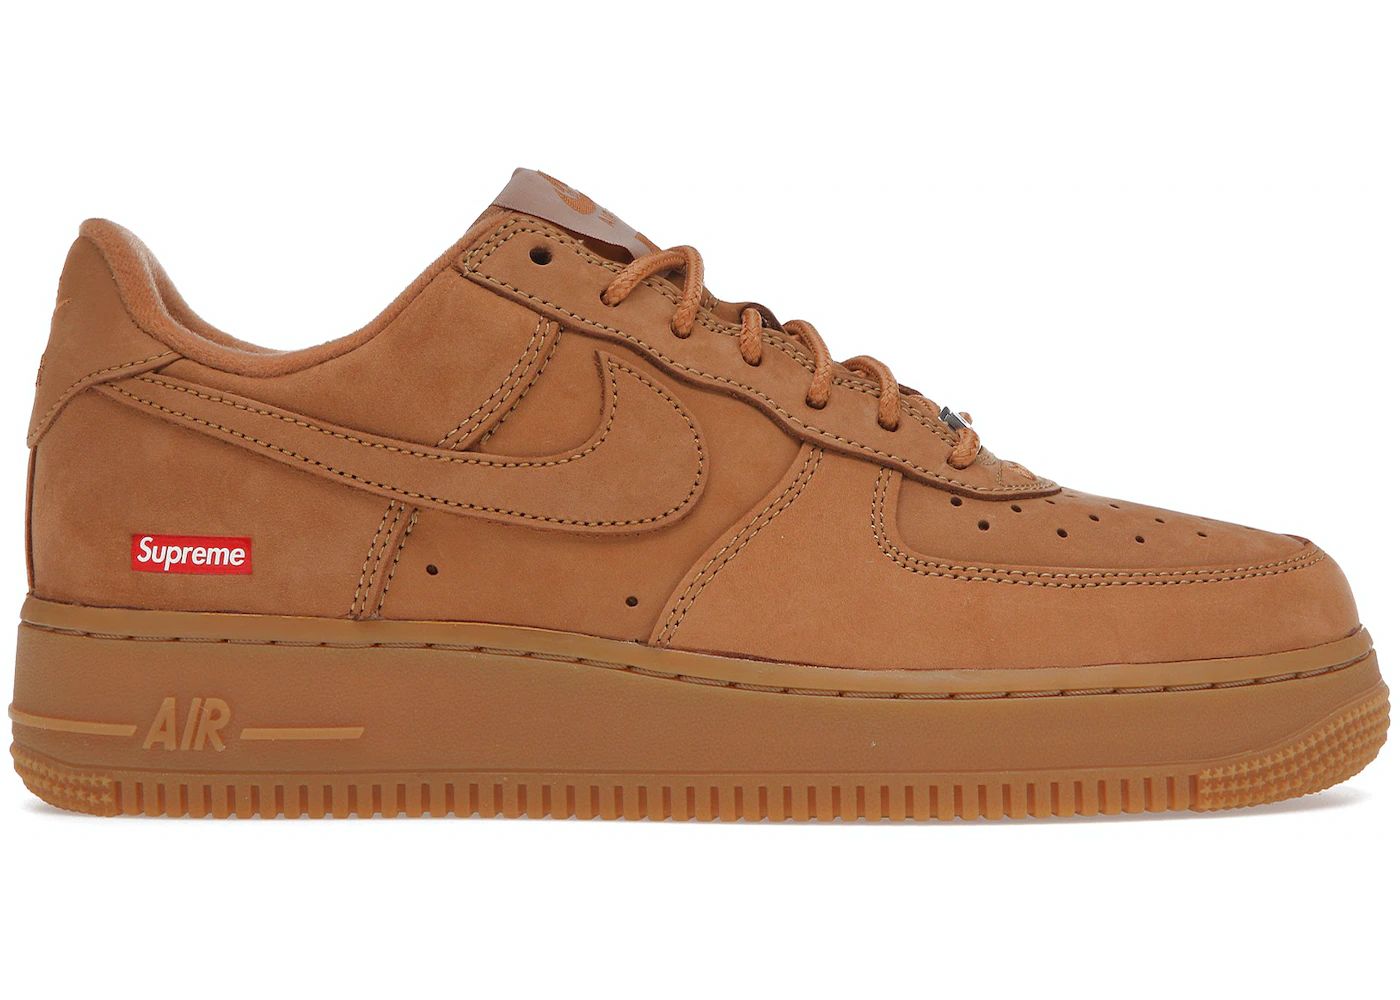 Nike Air Force 1 Low SPSupreme Wheat | StockX